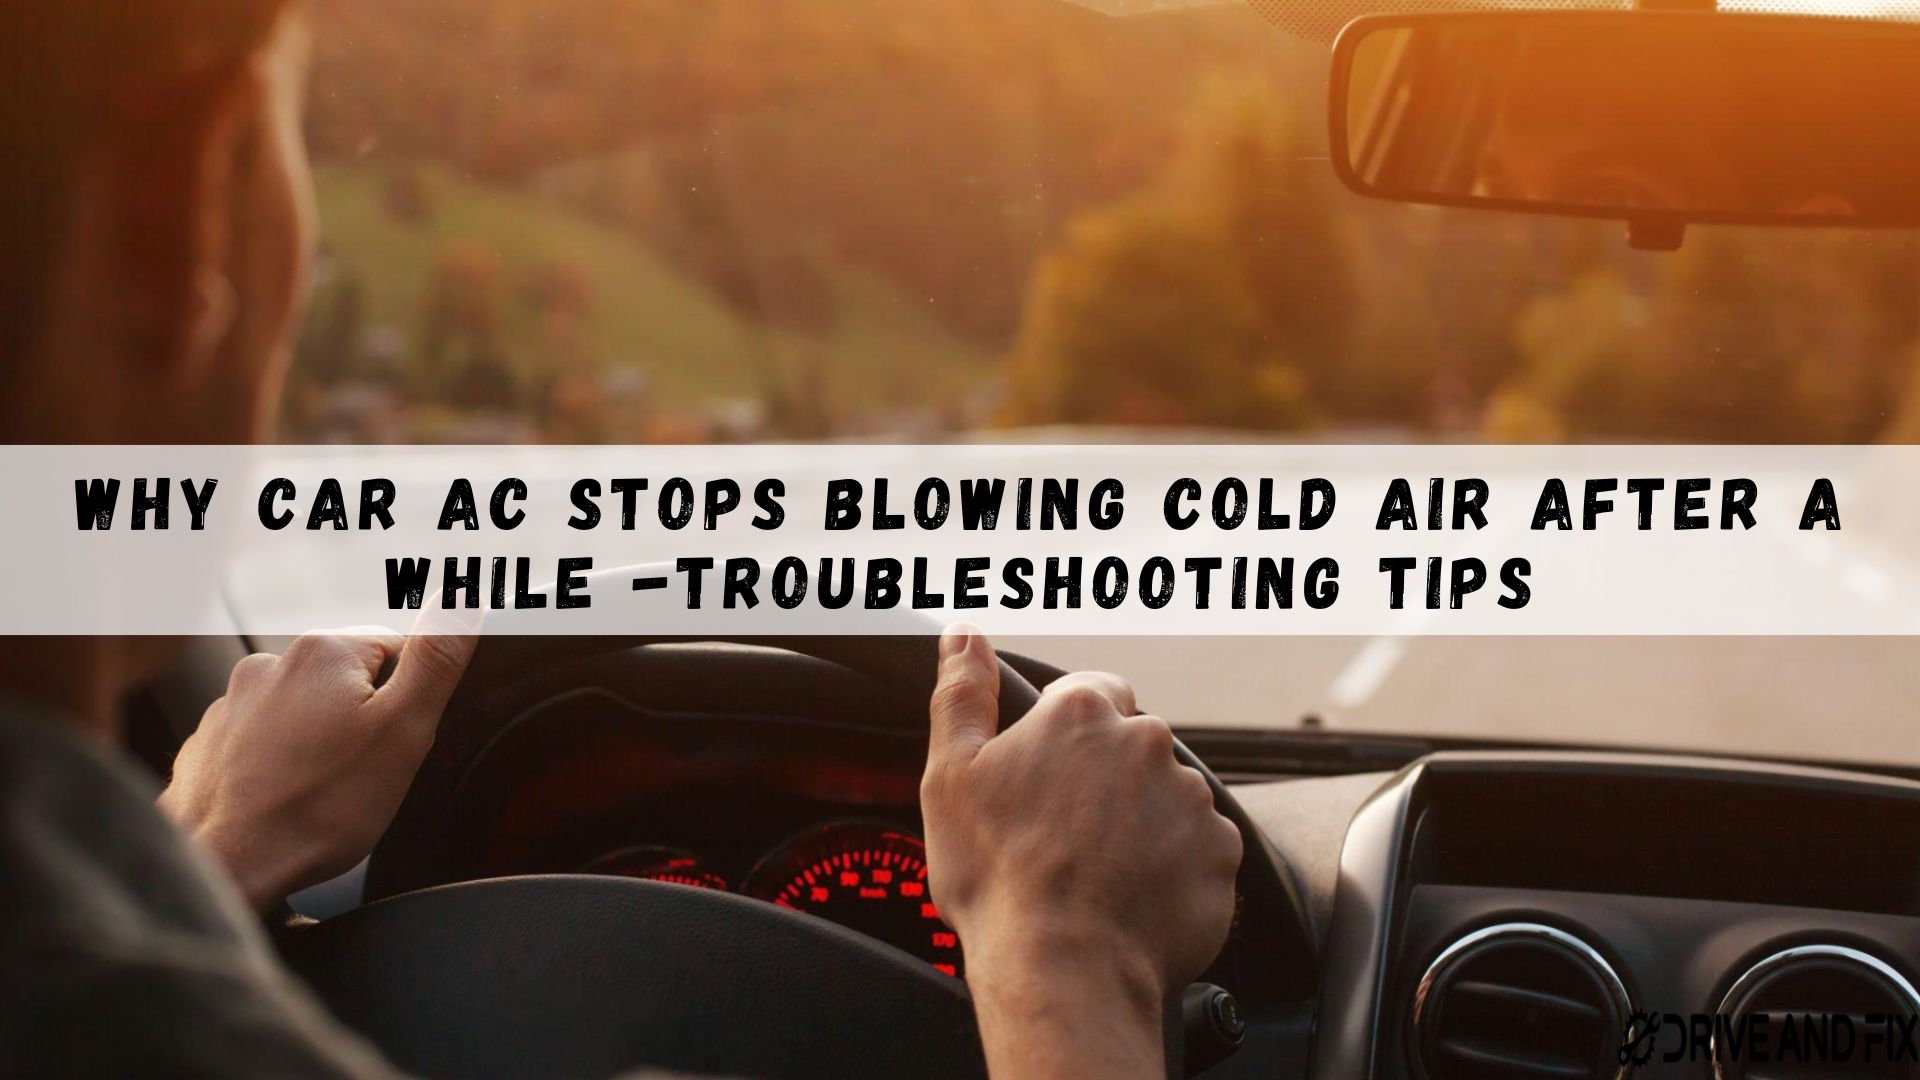 Car AC stops blowing cold air after a while